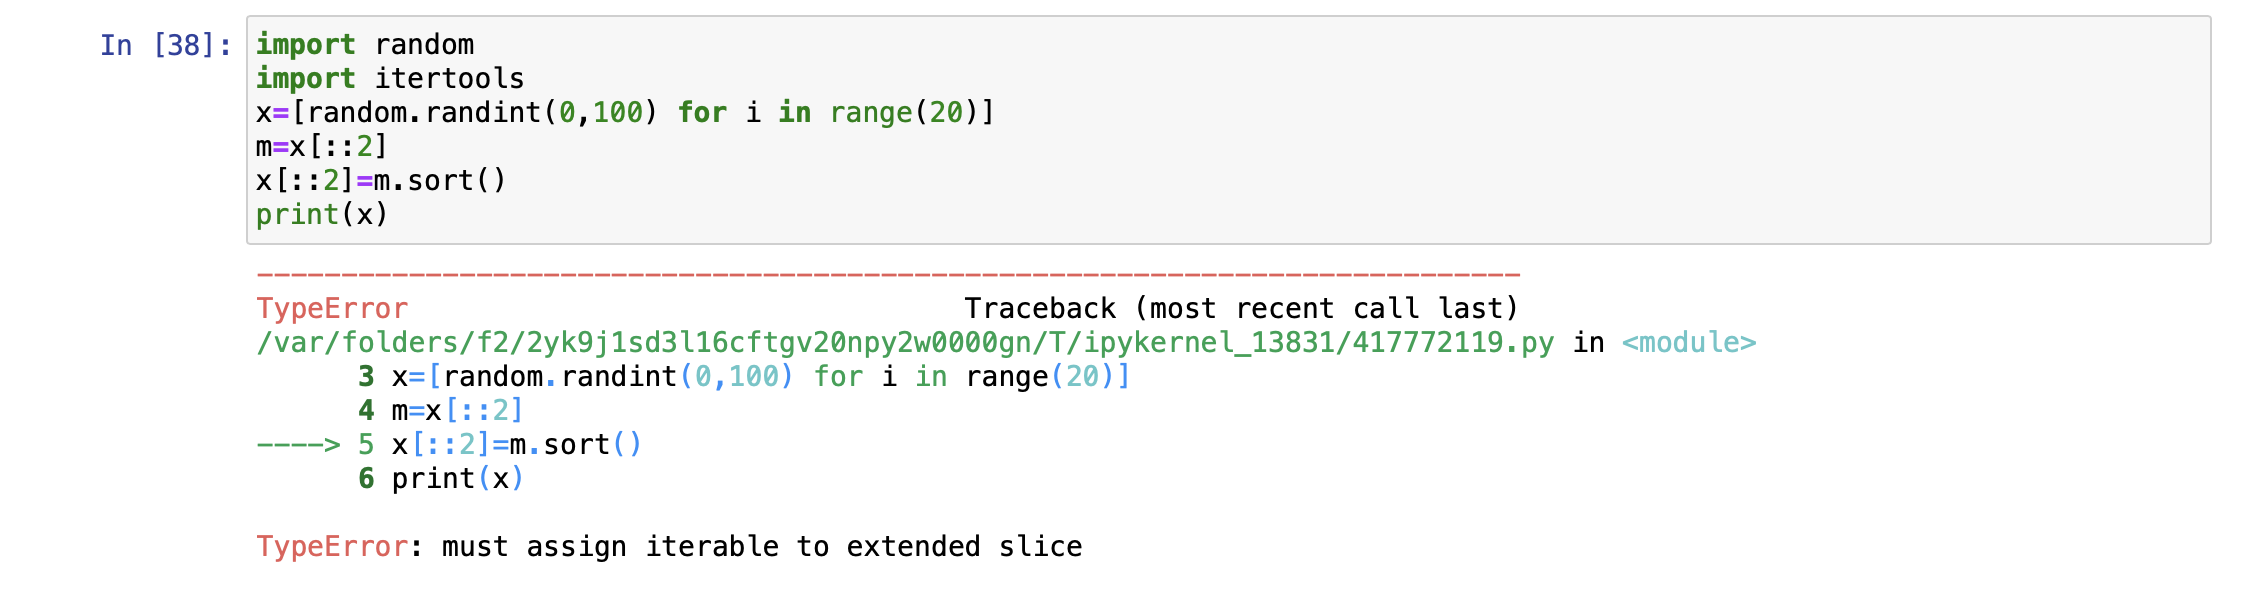 must assign iterable to extended sliceʲô 